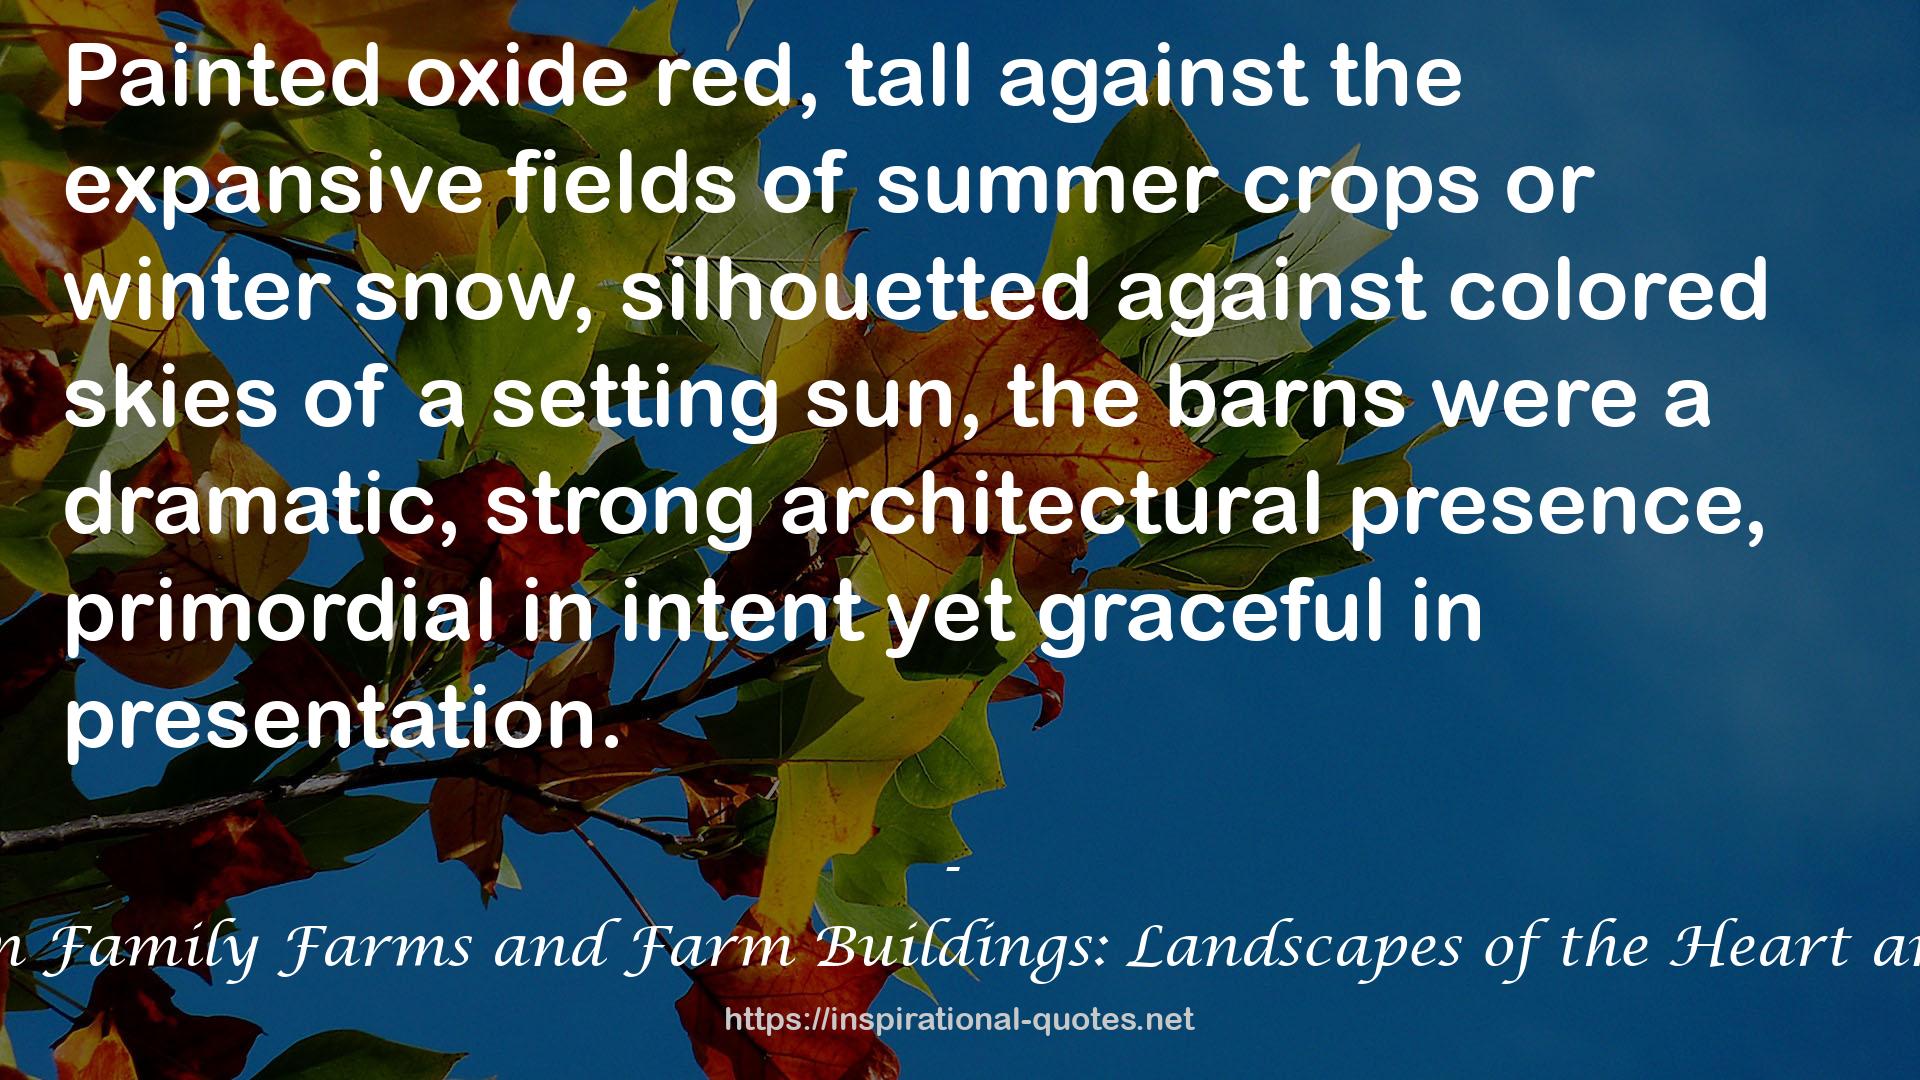 Michigan Family Farms and Farm Buildings: Landscapes of the Heart and Mind QUOTES